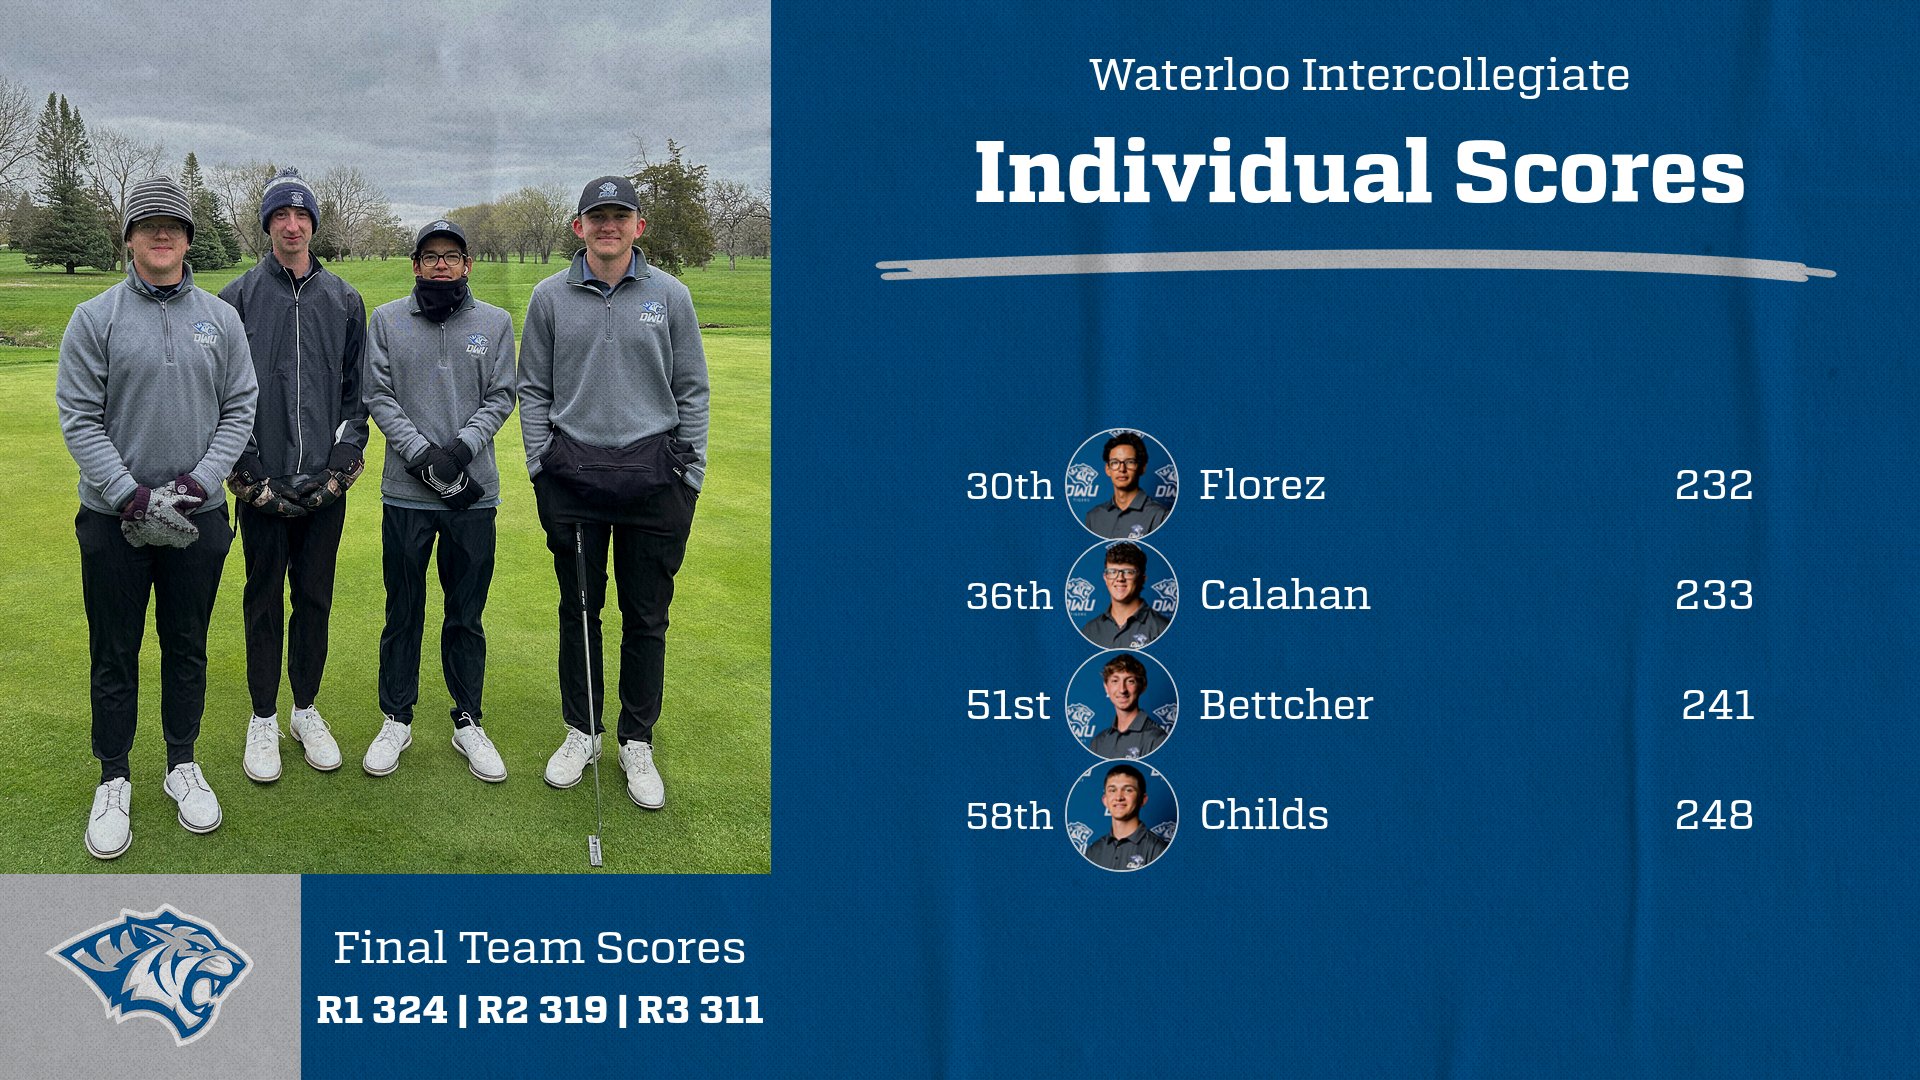 TIGERS FINISH WATERLOO INTERCOLLEGIATE STRONG IN THE WIND AND COLD